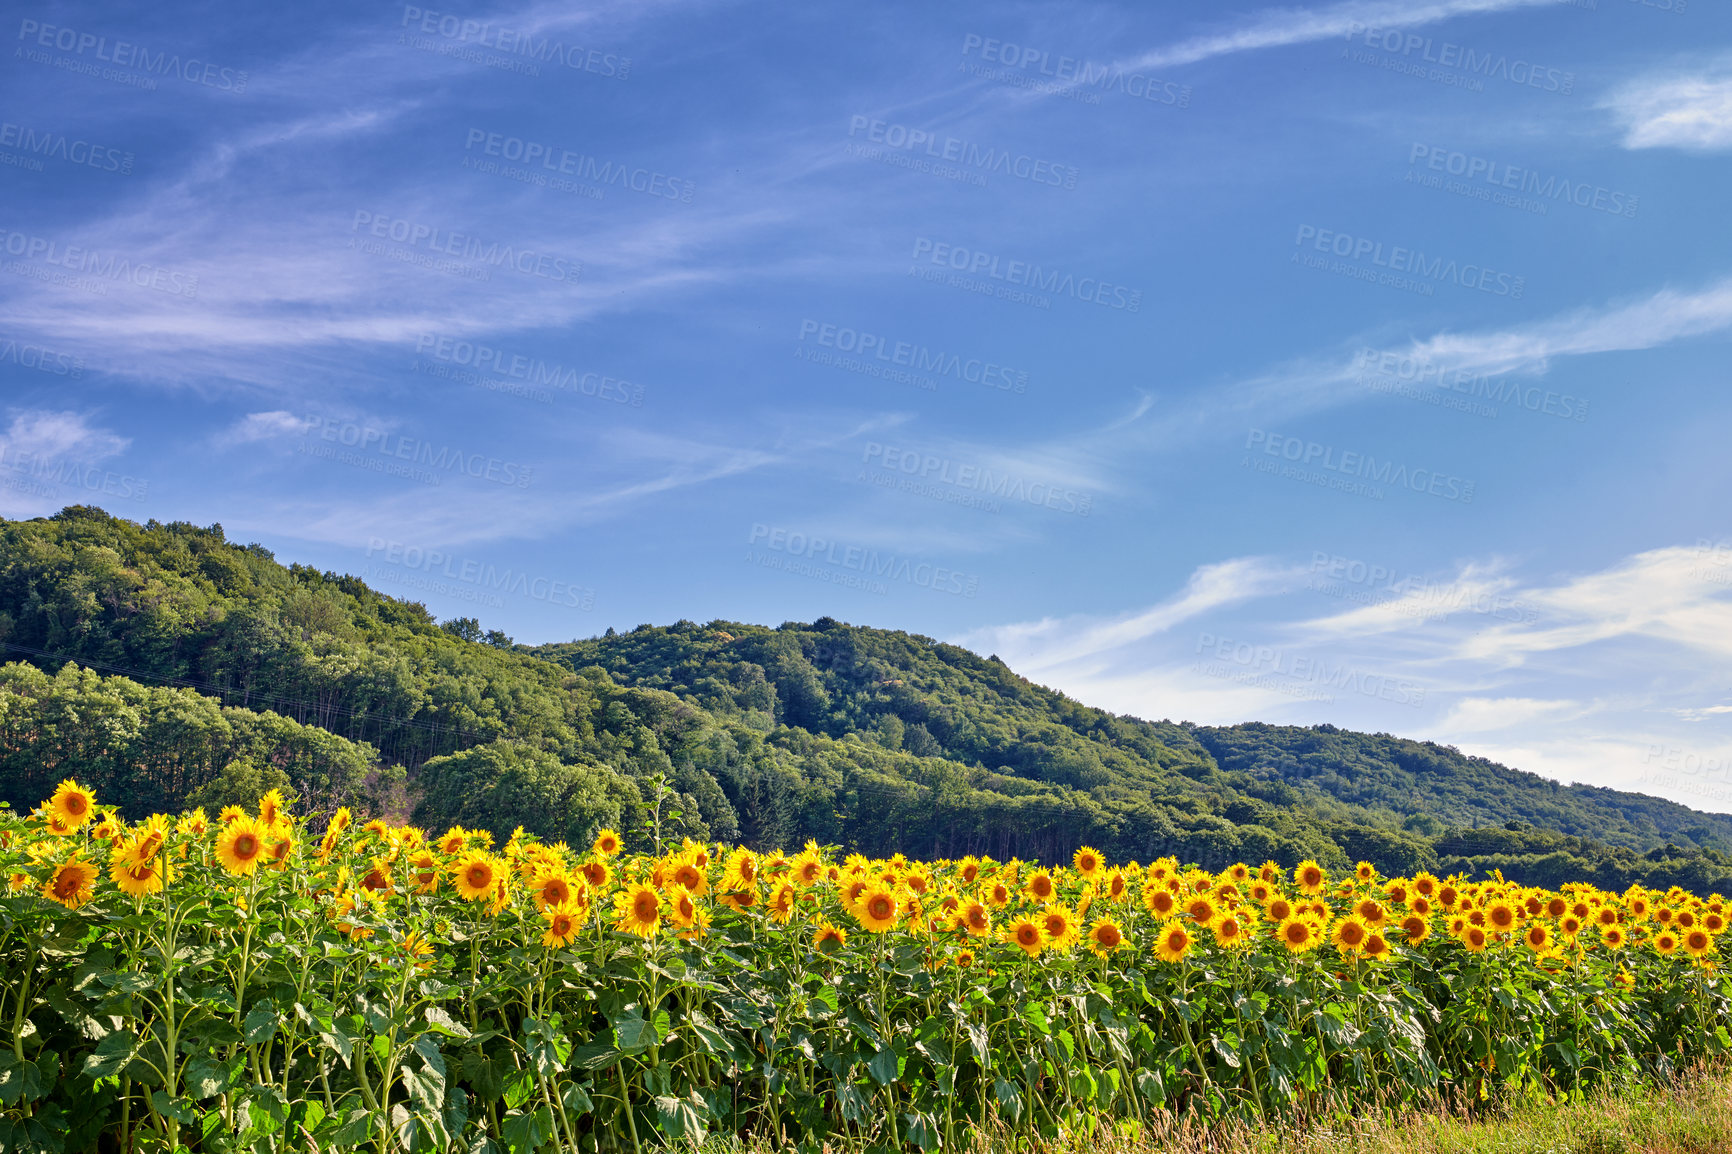 Buy stock photo Common yellow sunflowers growing in a field with a blue sky copy space background. Helianthus annuus with vibrant petals blooming in spring. Scenic landscape of plants blossoming in a sunny meadow